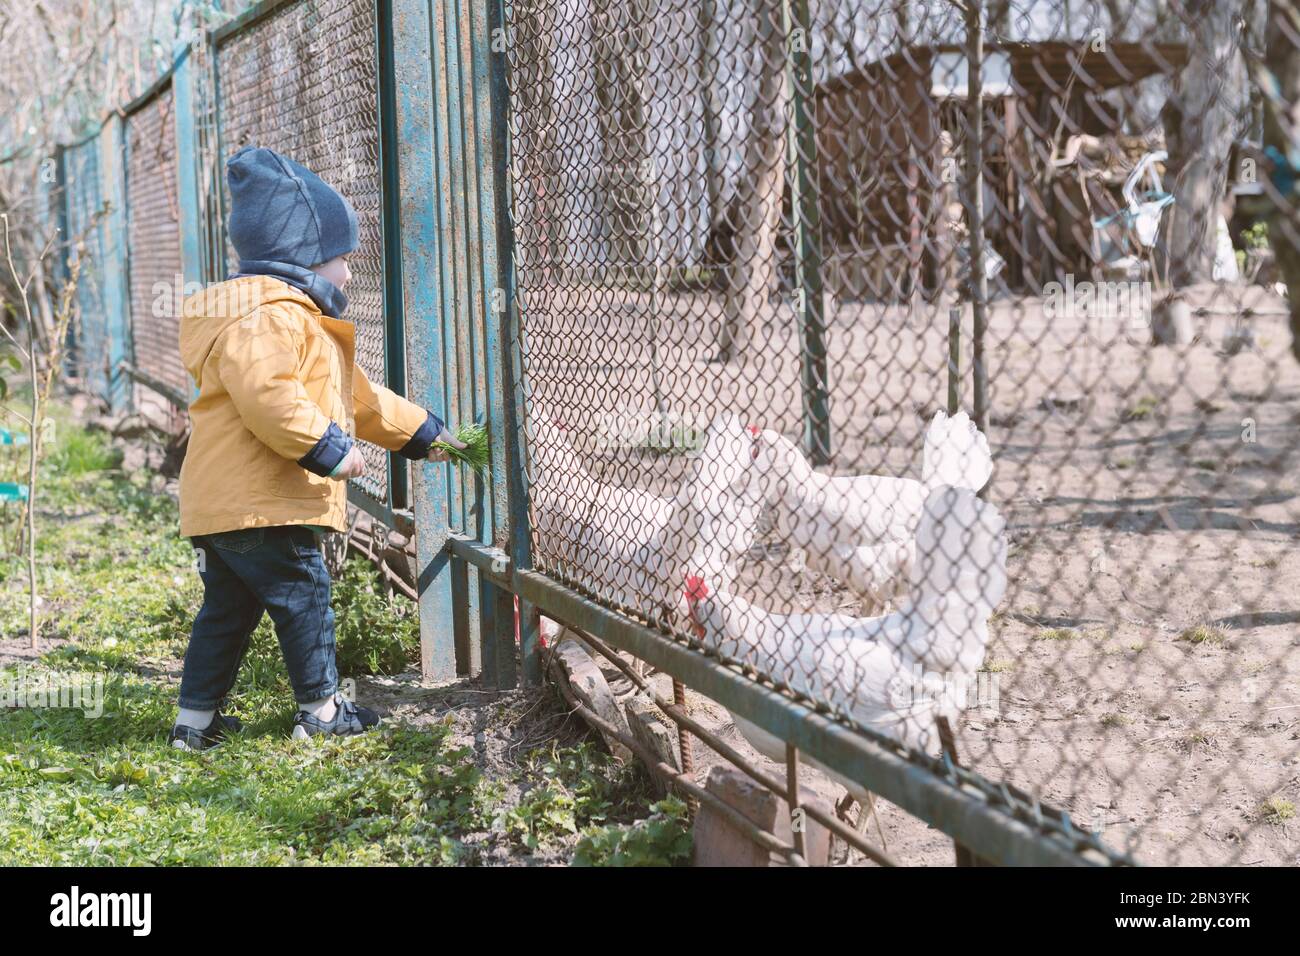 Little boy feeds the chickens through the grate in the spring garden Stock Photo